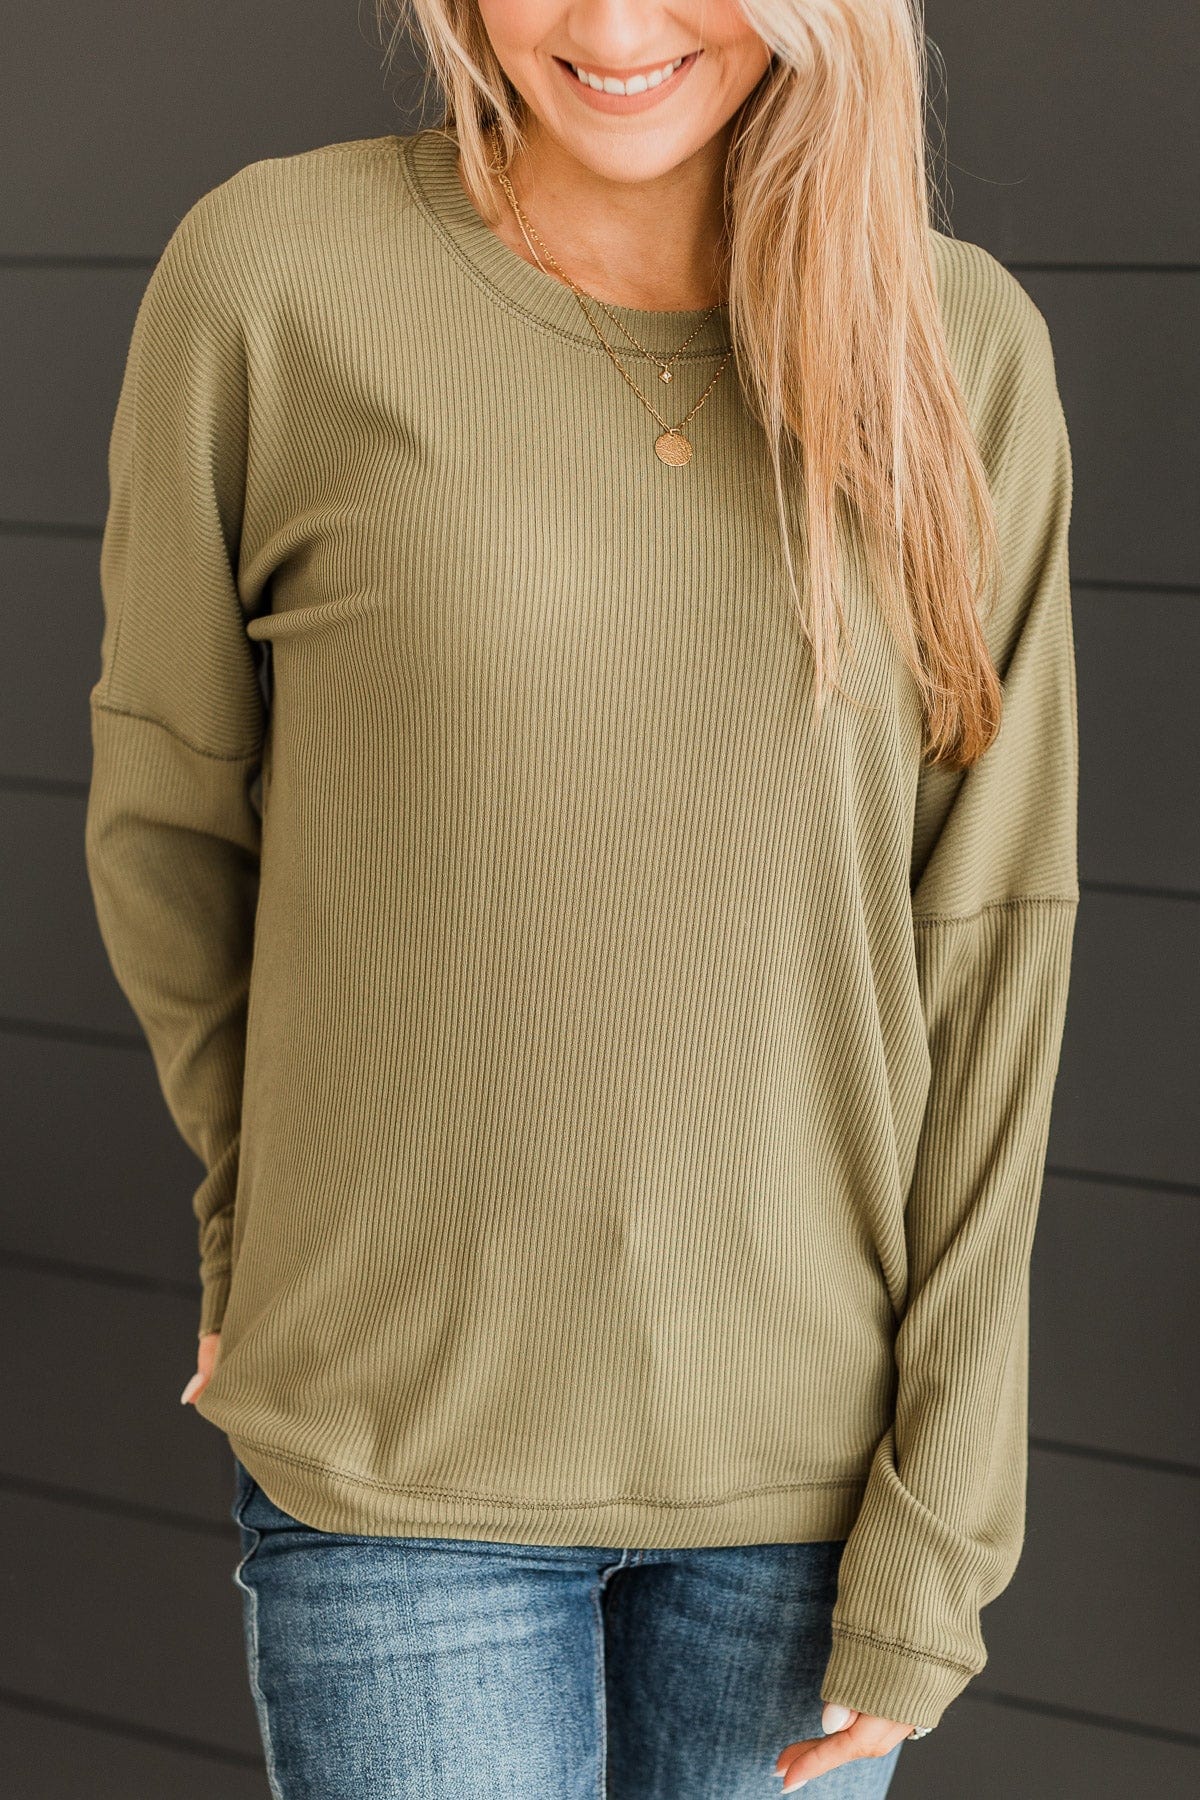 Express It All Knit Pullover Top- Olive